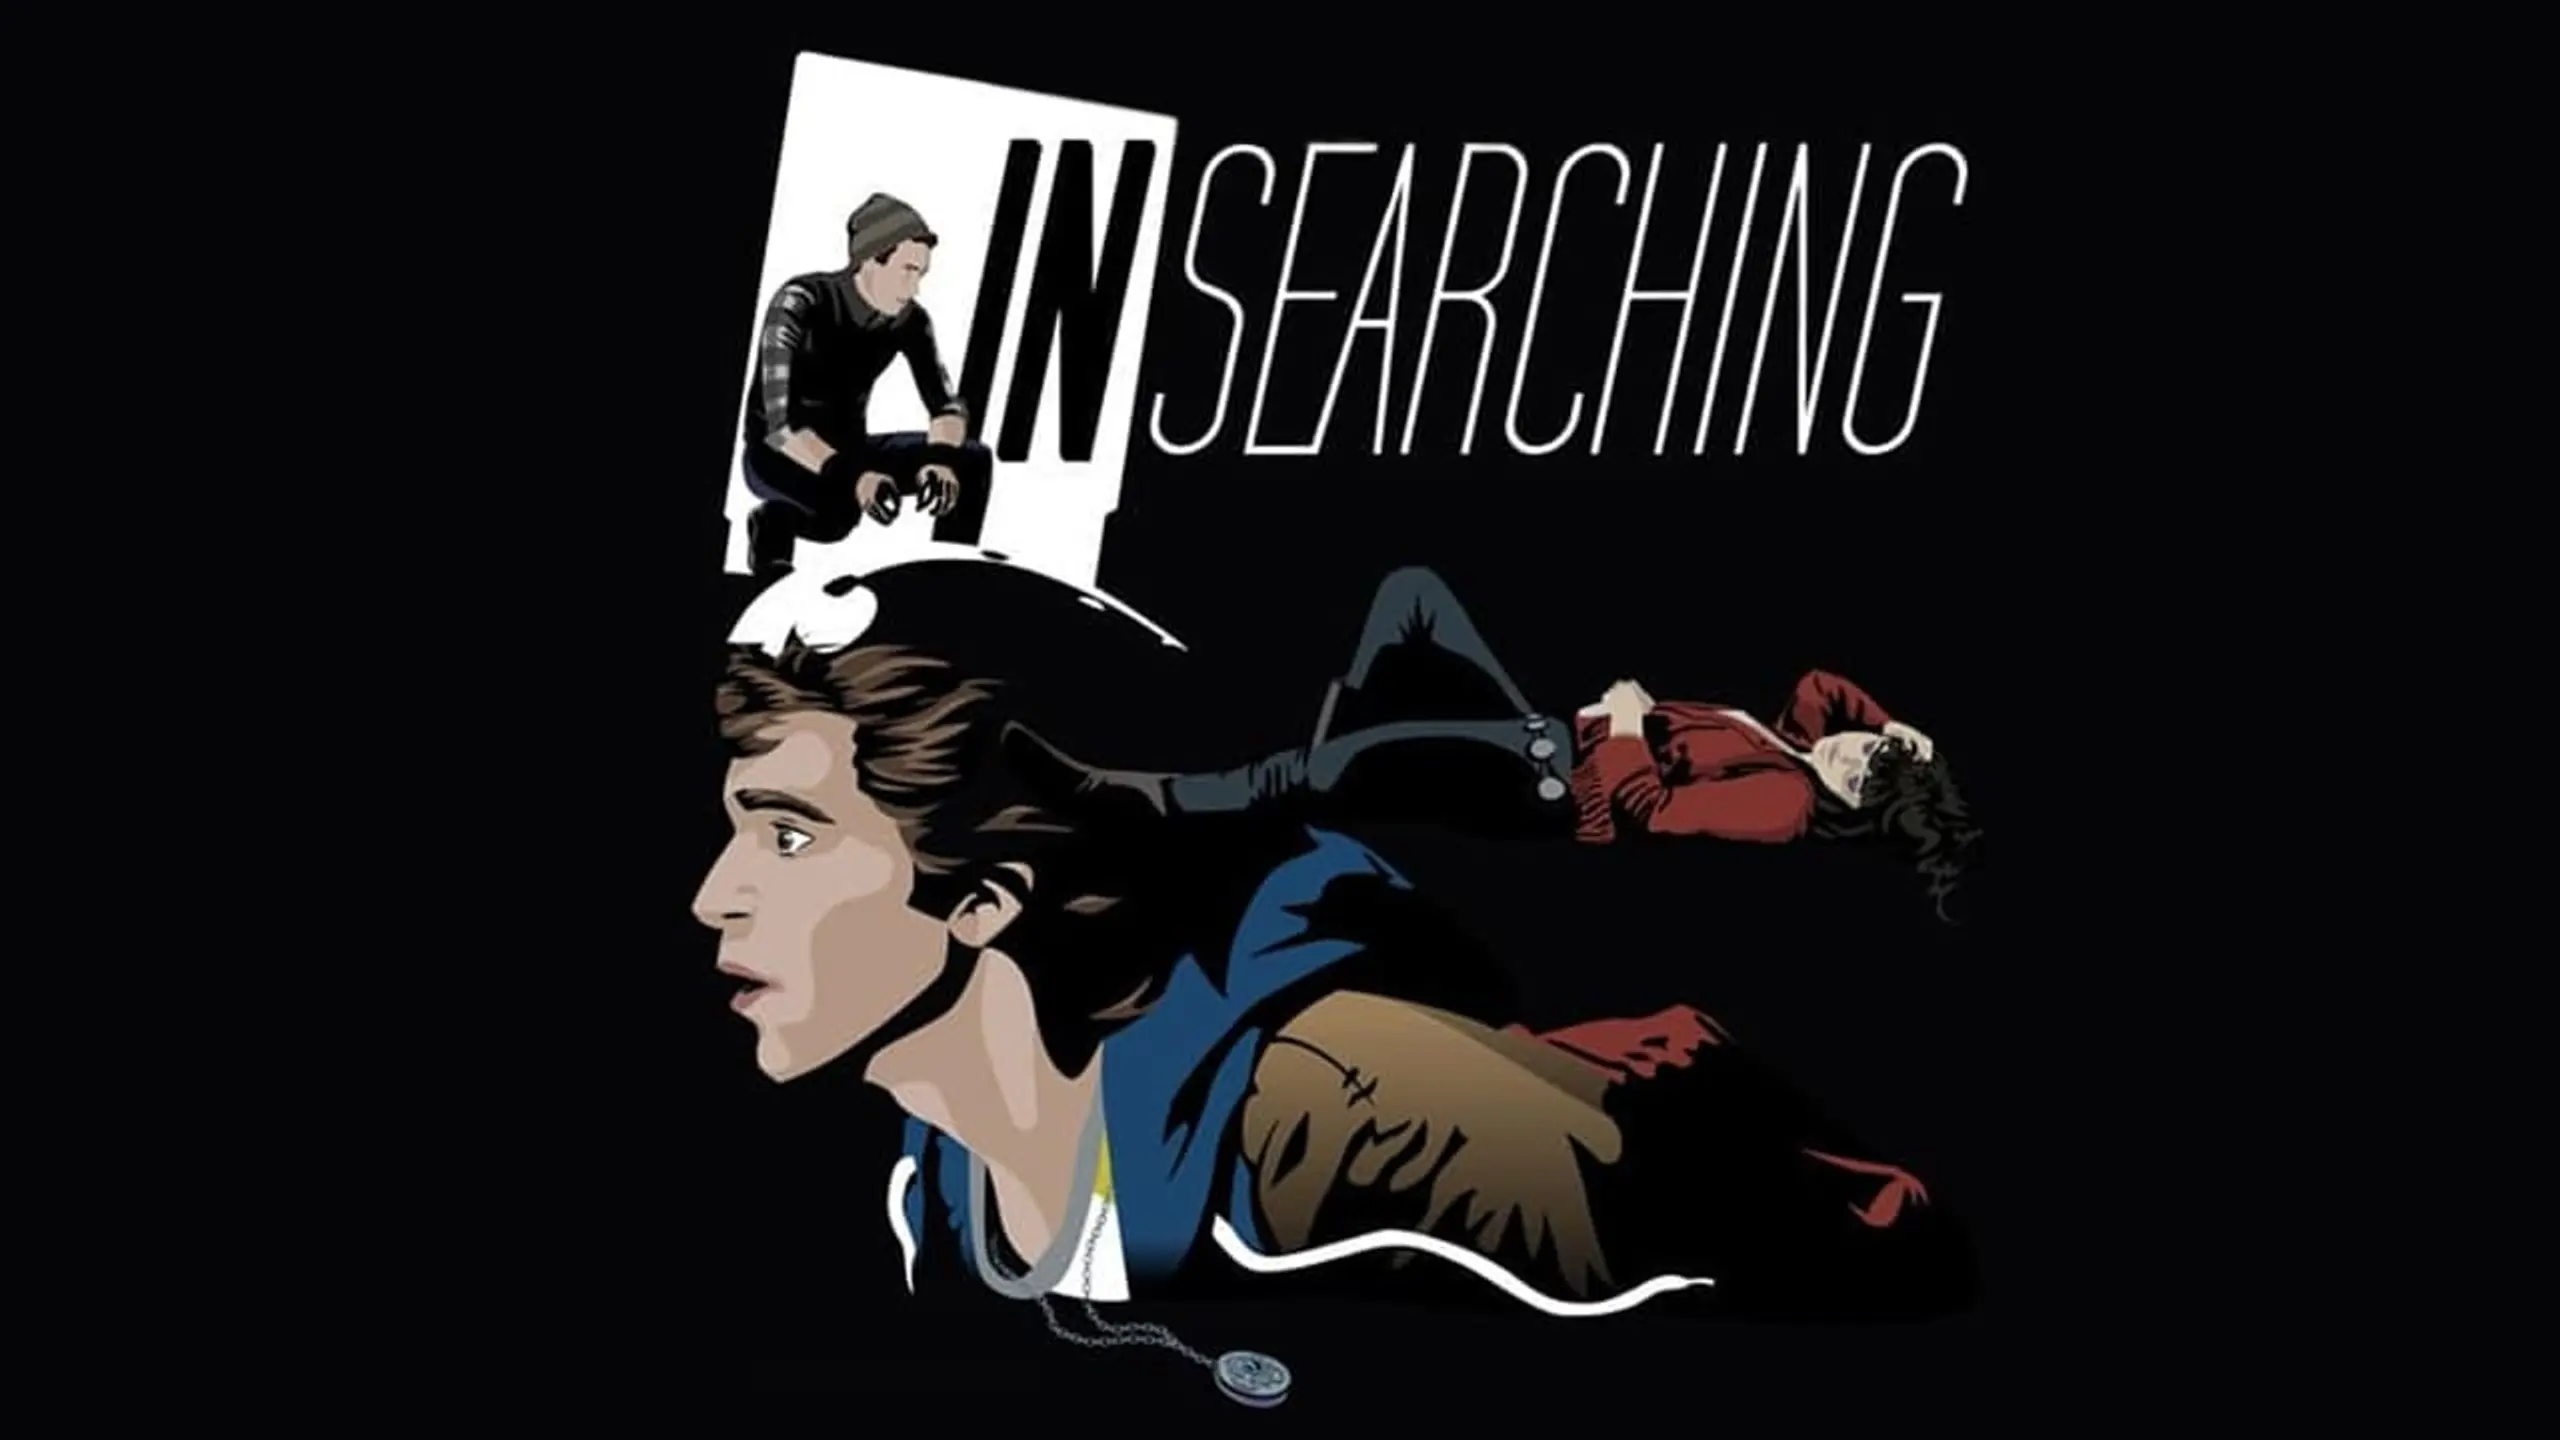 In Searching